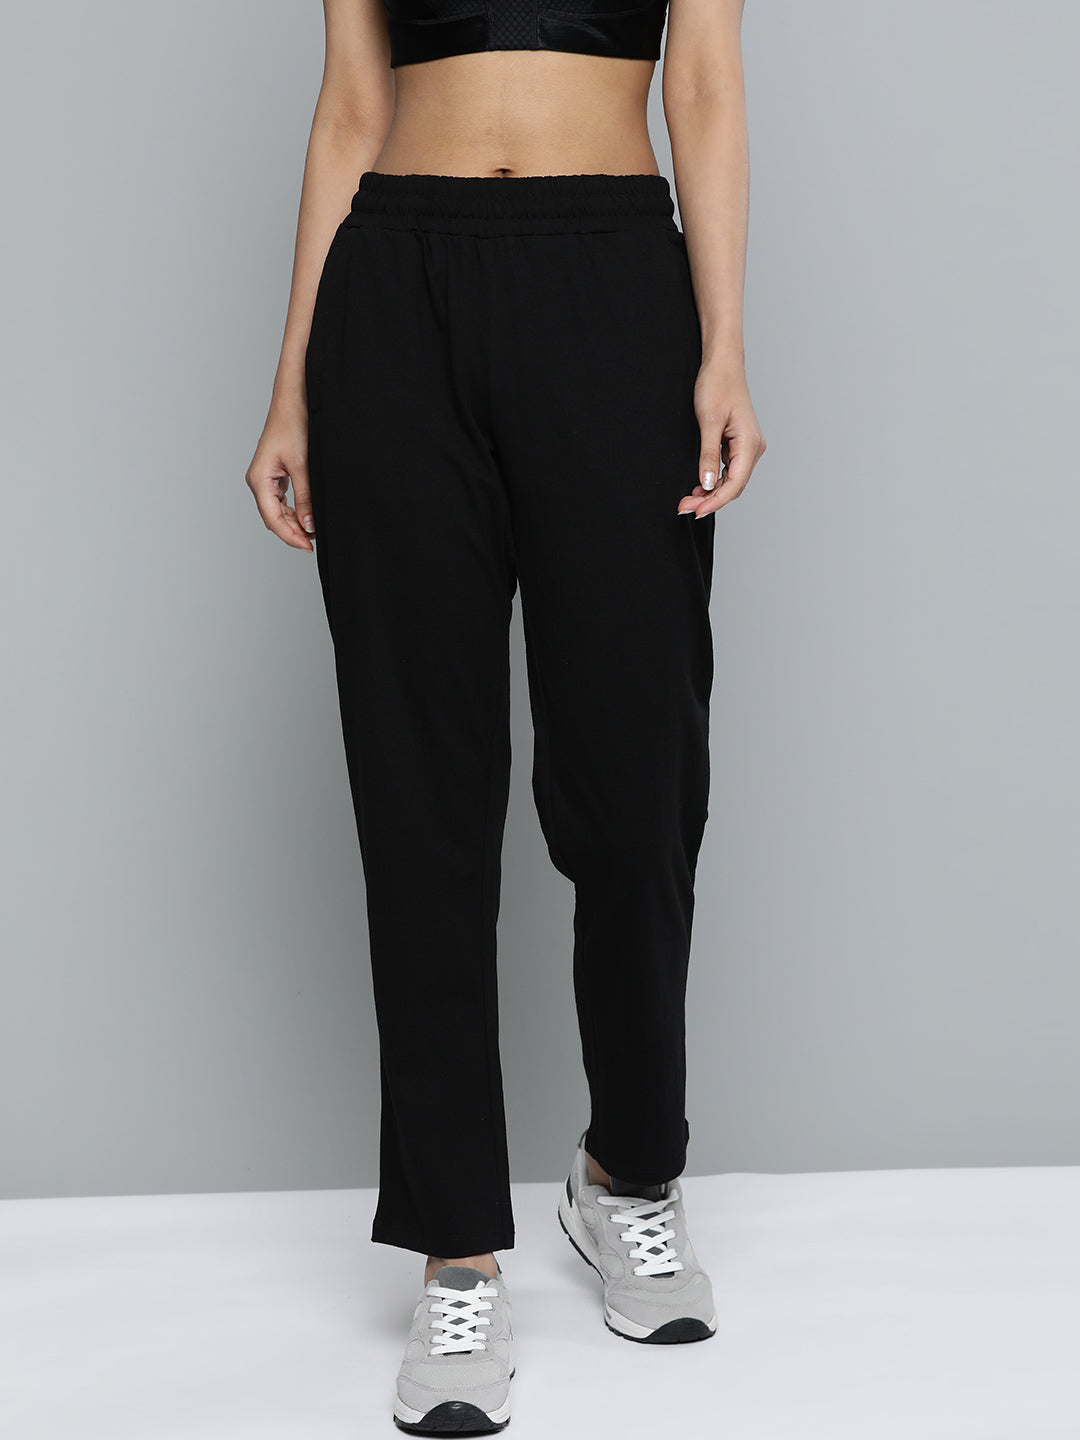 Alcis Women Black Solid Straight Fit Track Pants